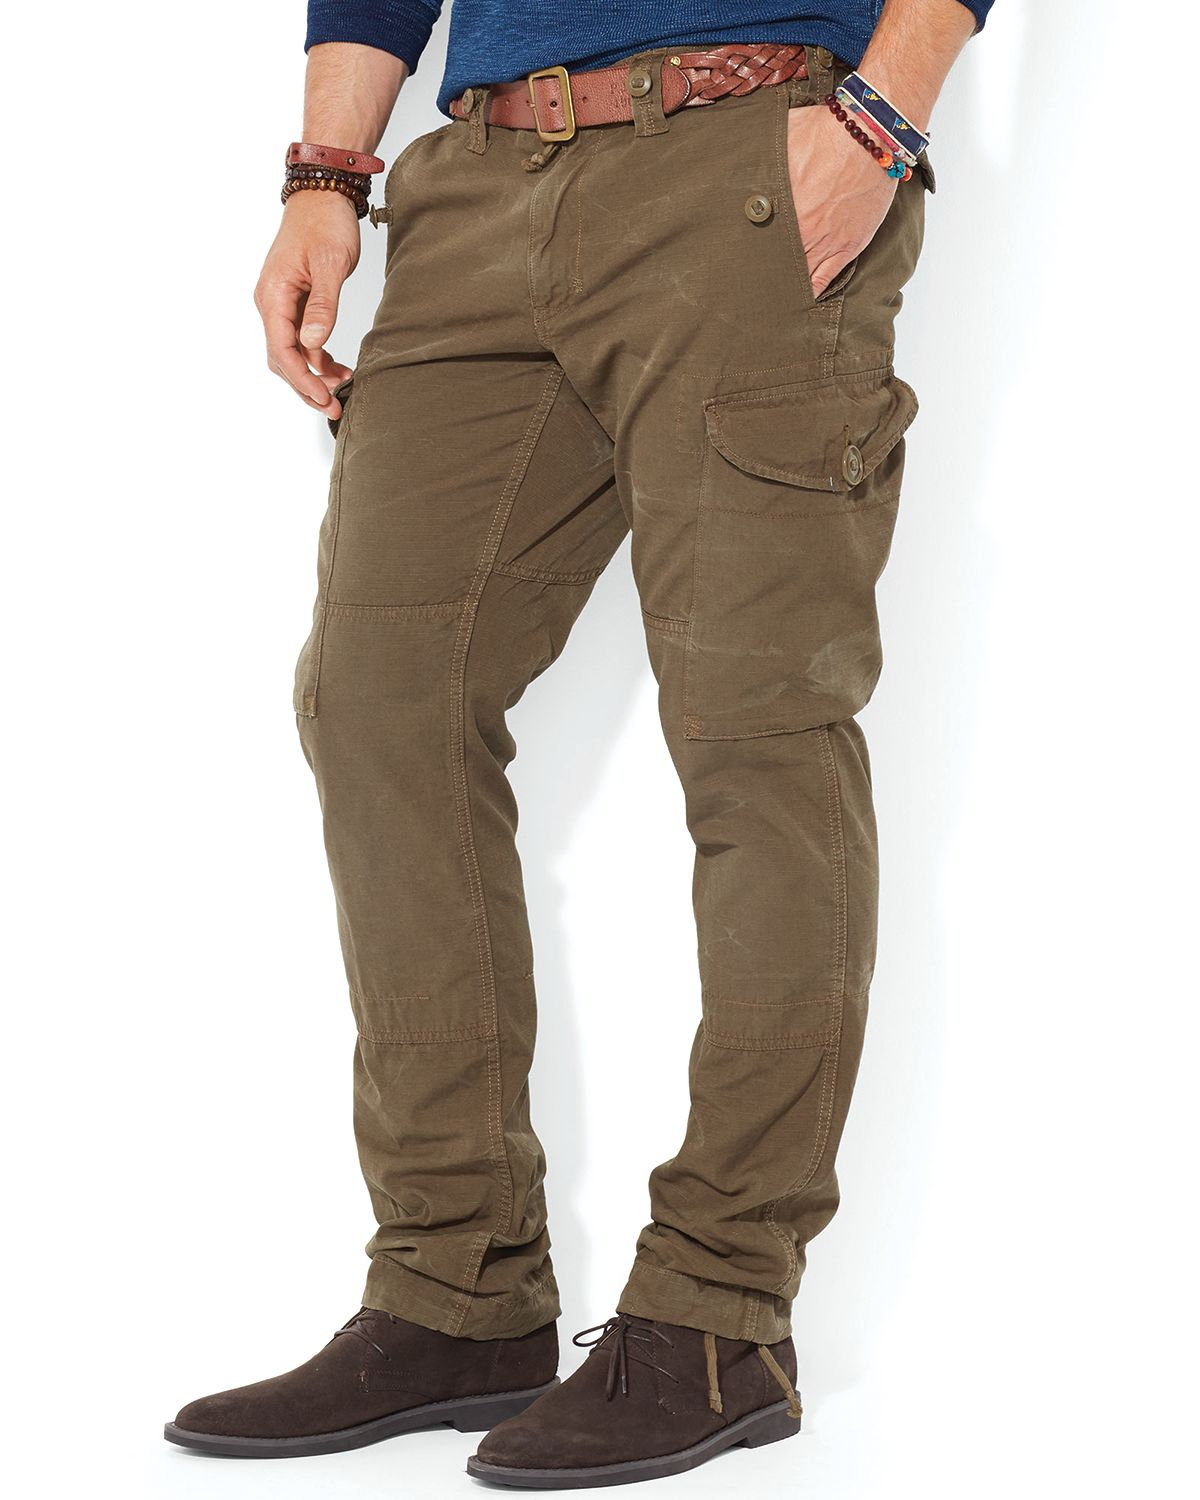 Lyst - Ralph Lauren Polo Ripstop Cargo Pants - Straight Fit in Green ...